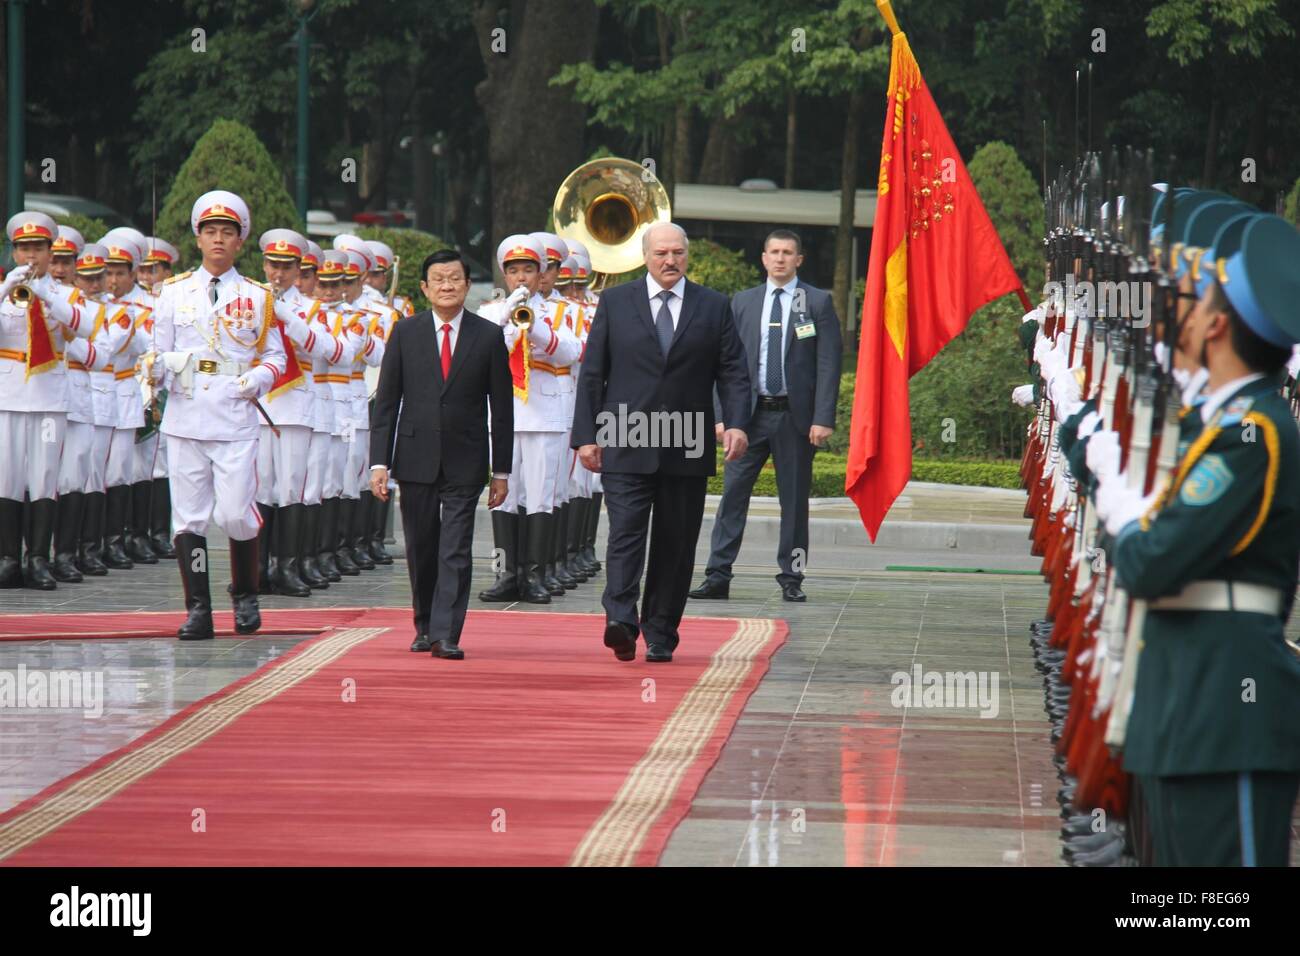 (151209) -- HANOI, Dec. 9, 2015 (Xinhua) -- Vietnamese President Truong Tan Sang (L, center) and Belarusian President Alexander Lukashenko (R, center) review the guard of honor during a welcoming ceremony held in Hanoi, capital of Vietnam, Dec. 9, 2015. Lukashenko is paying a two-day official visit to Vietnam from Tuesday. (Xinhua/Le Yanna) Stock Photo